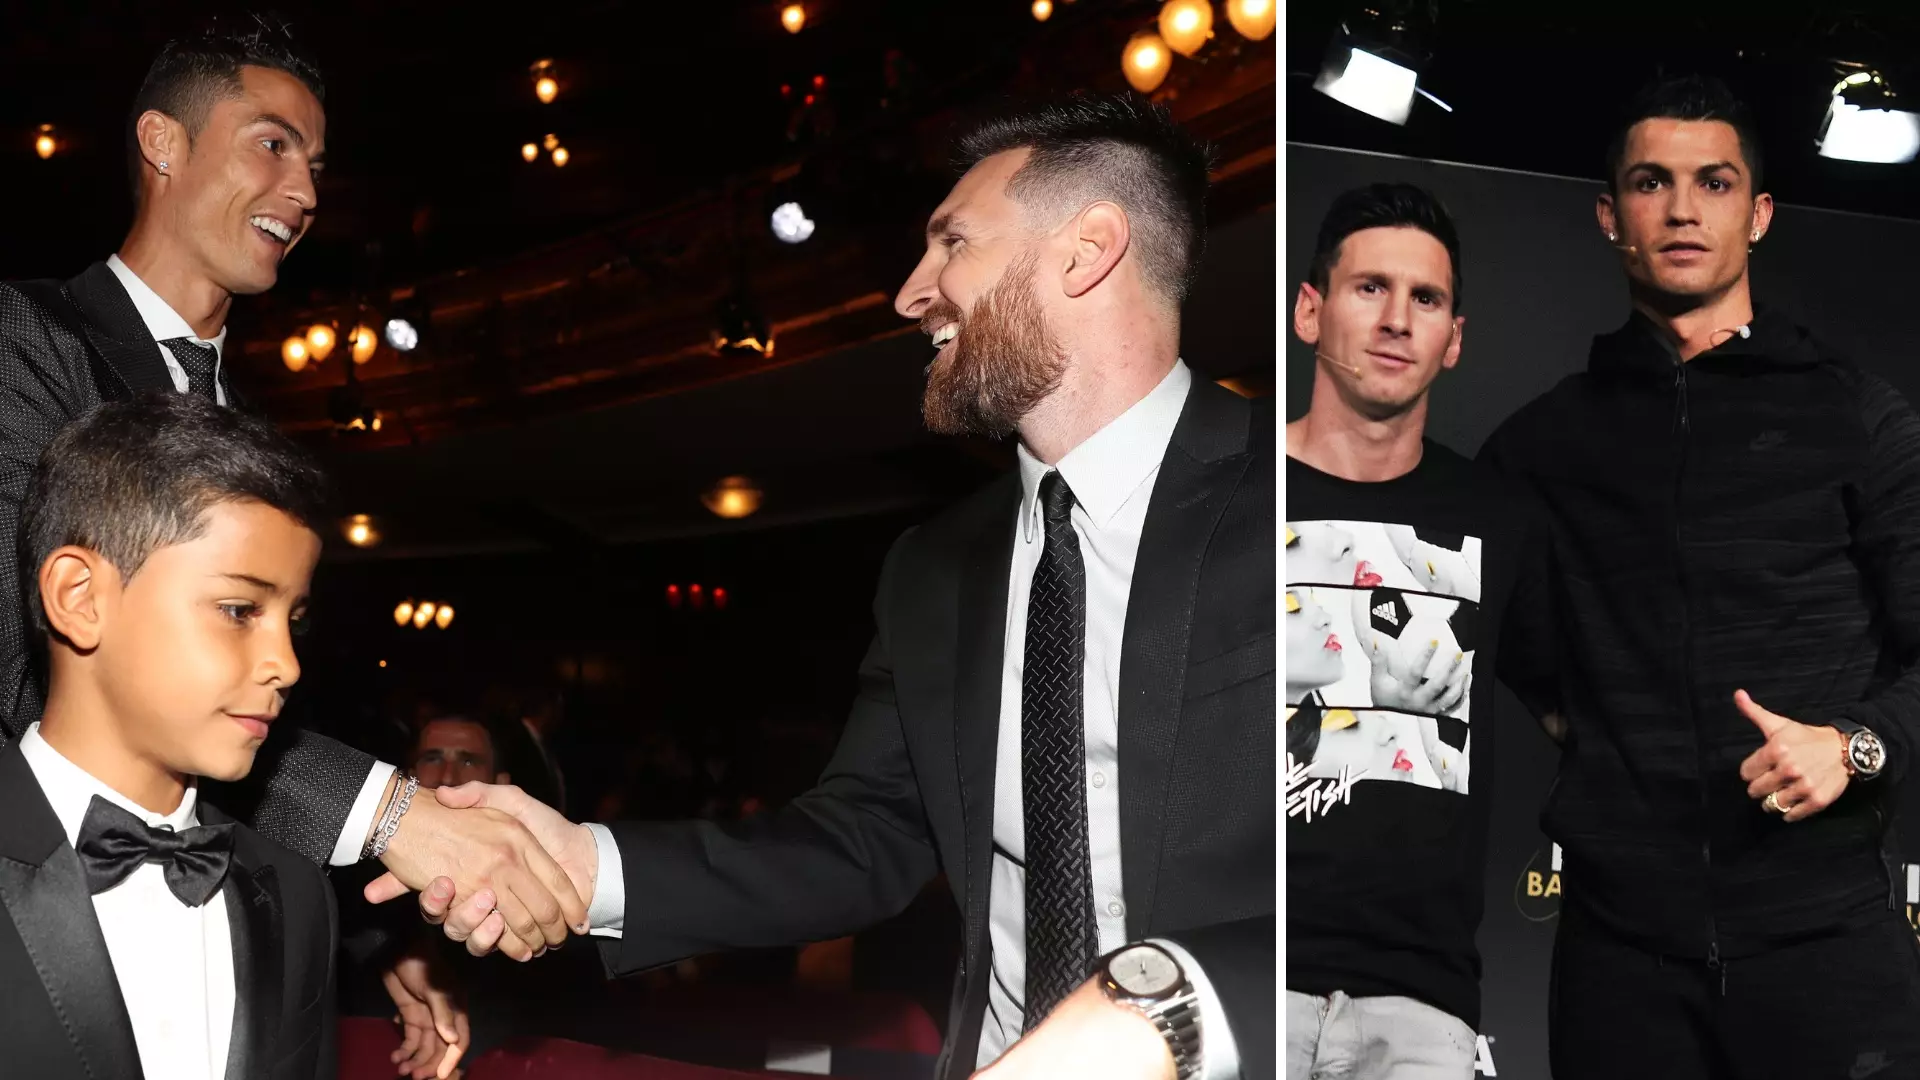 Fan-Made Video Shows The Great Sportsmanship Cristiano Ronaldo, Lionel Messi Share For One Another